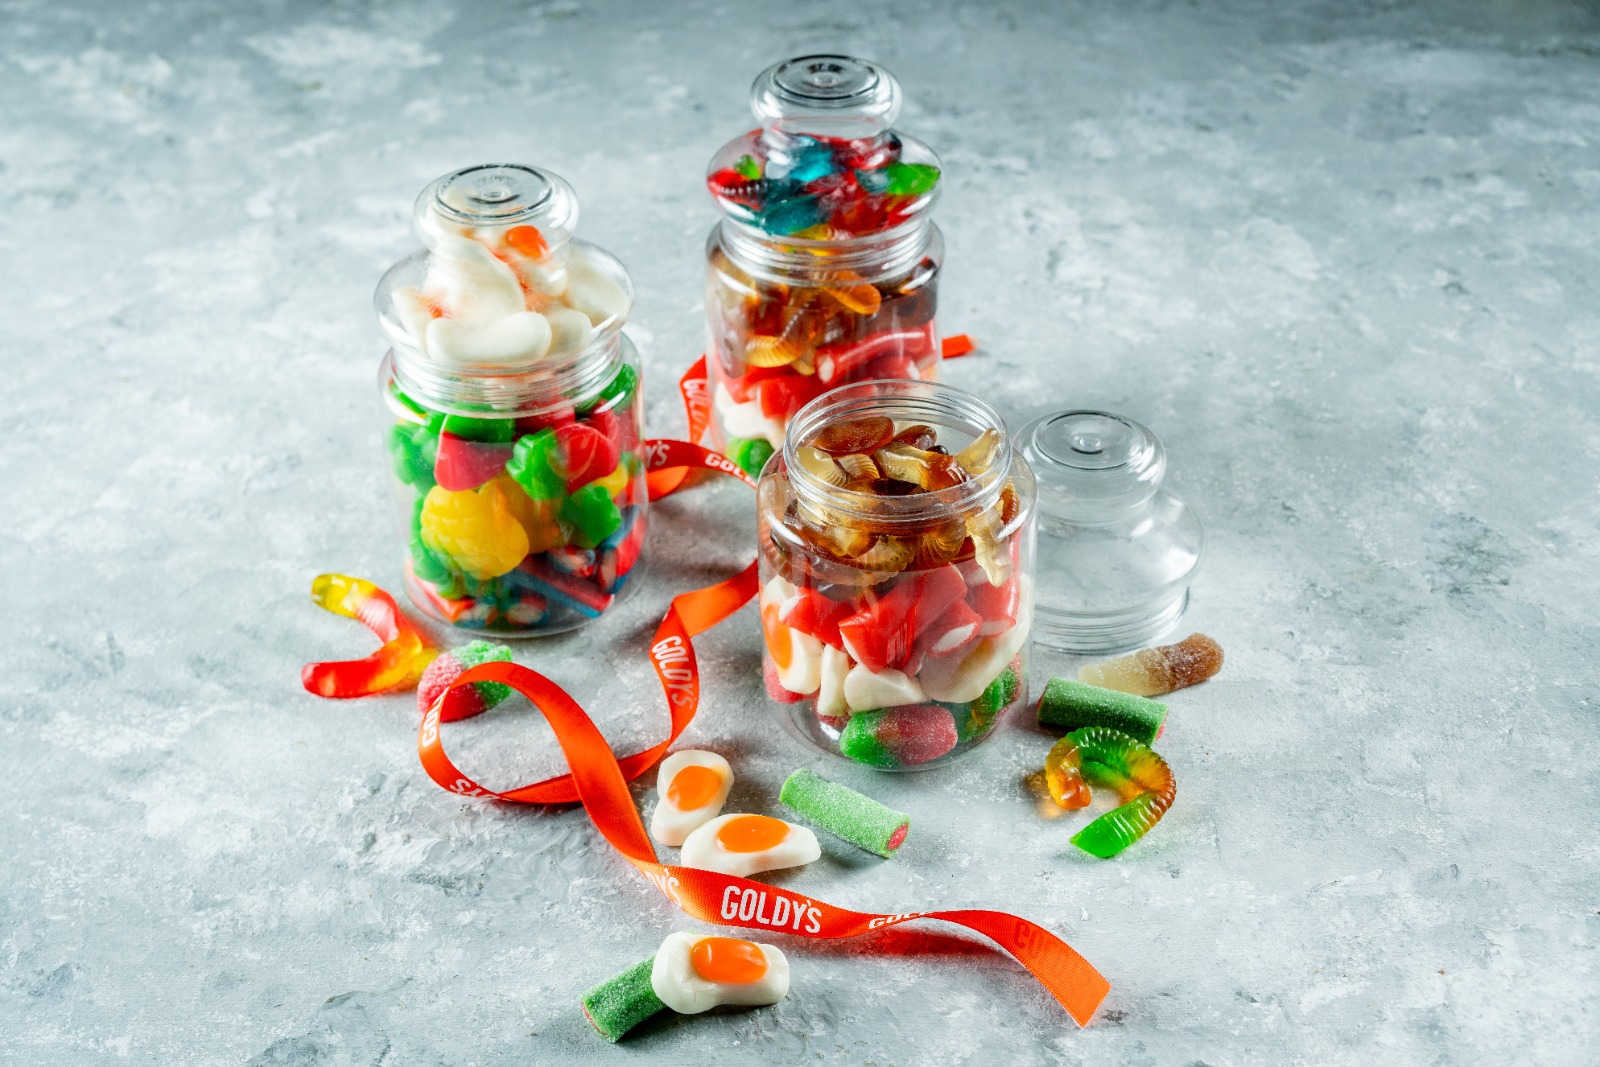 Mix jellies & licorice in a jar